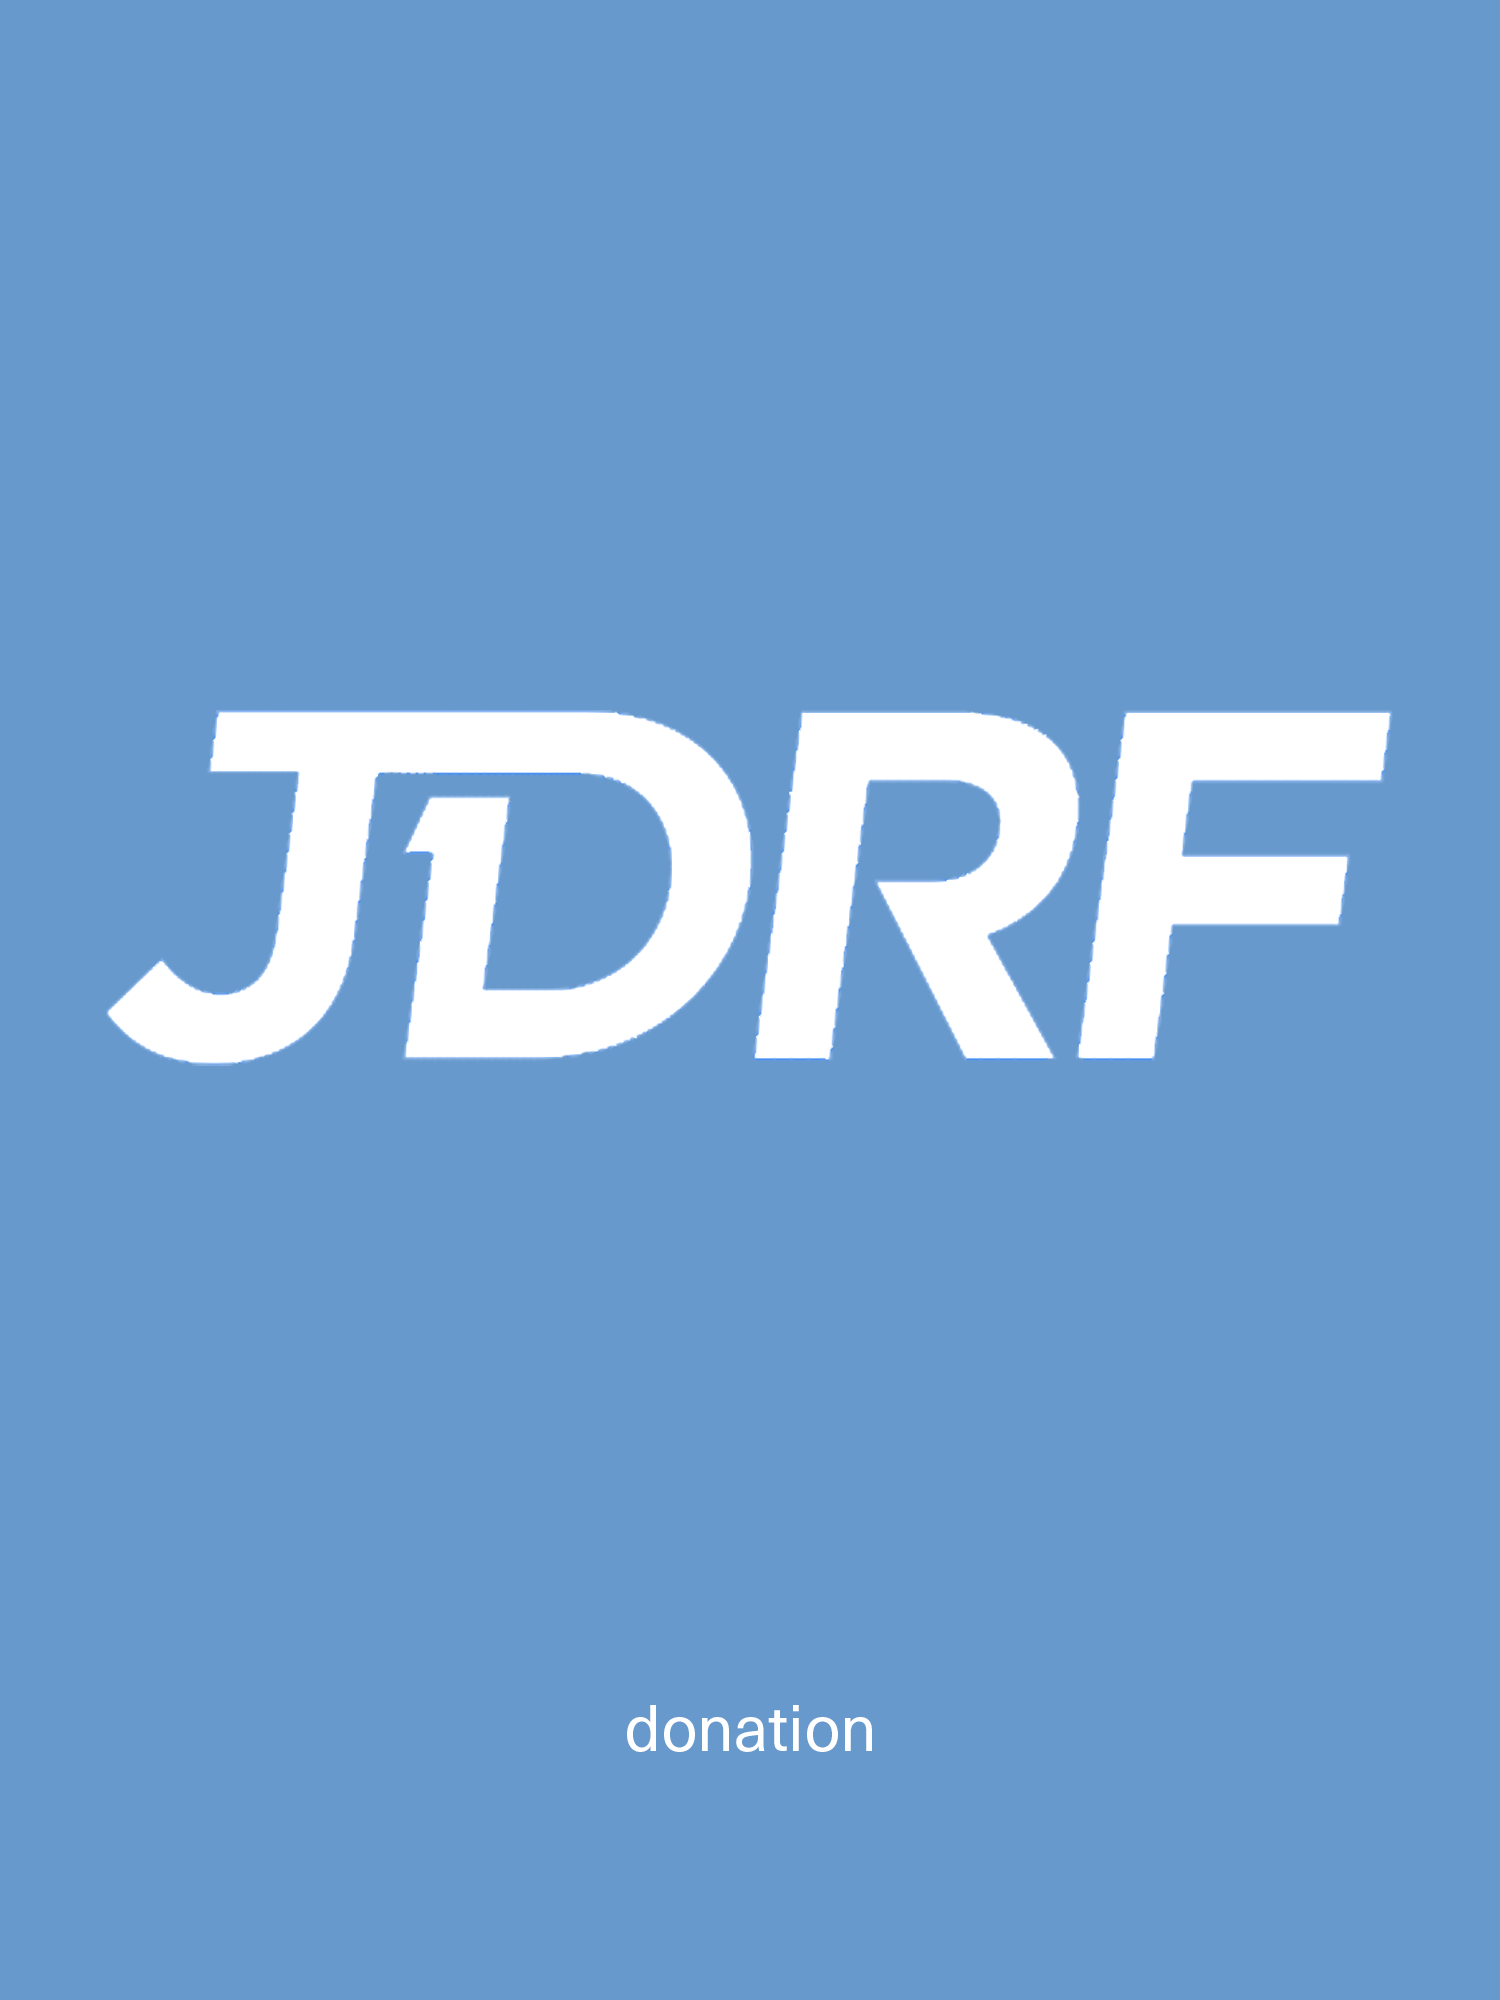 Donate to JDRF